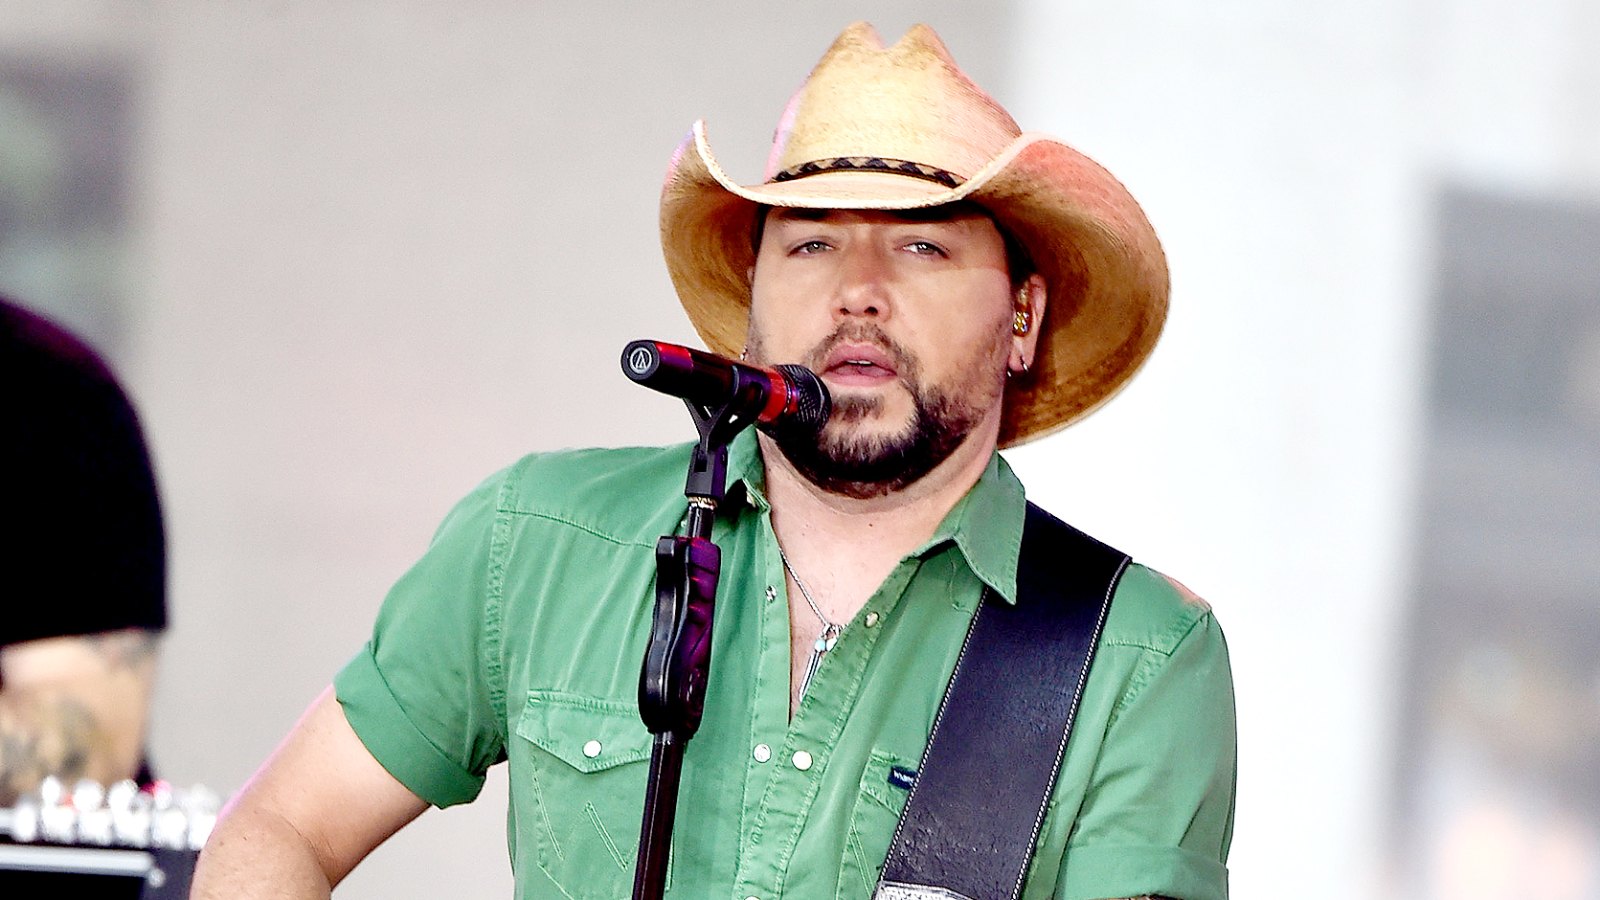 Jason Aldean performs on NBC's "Today" at Rockefeller Plaza on August 25, 2017 in New York City.